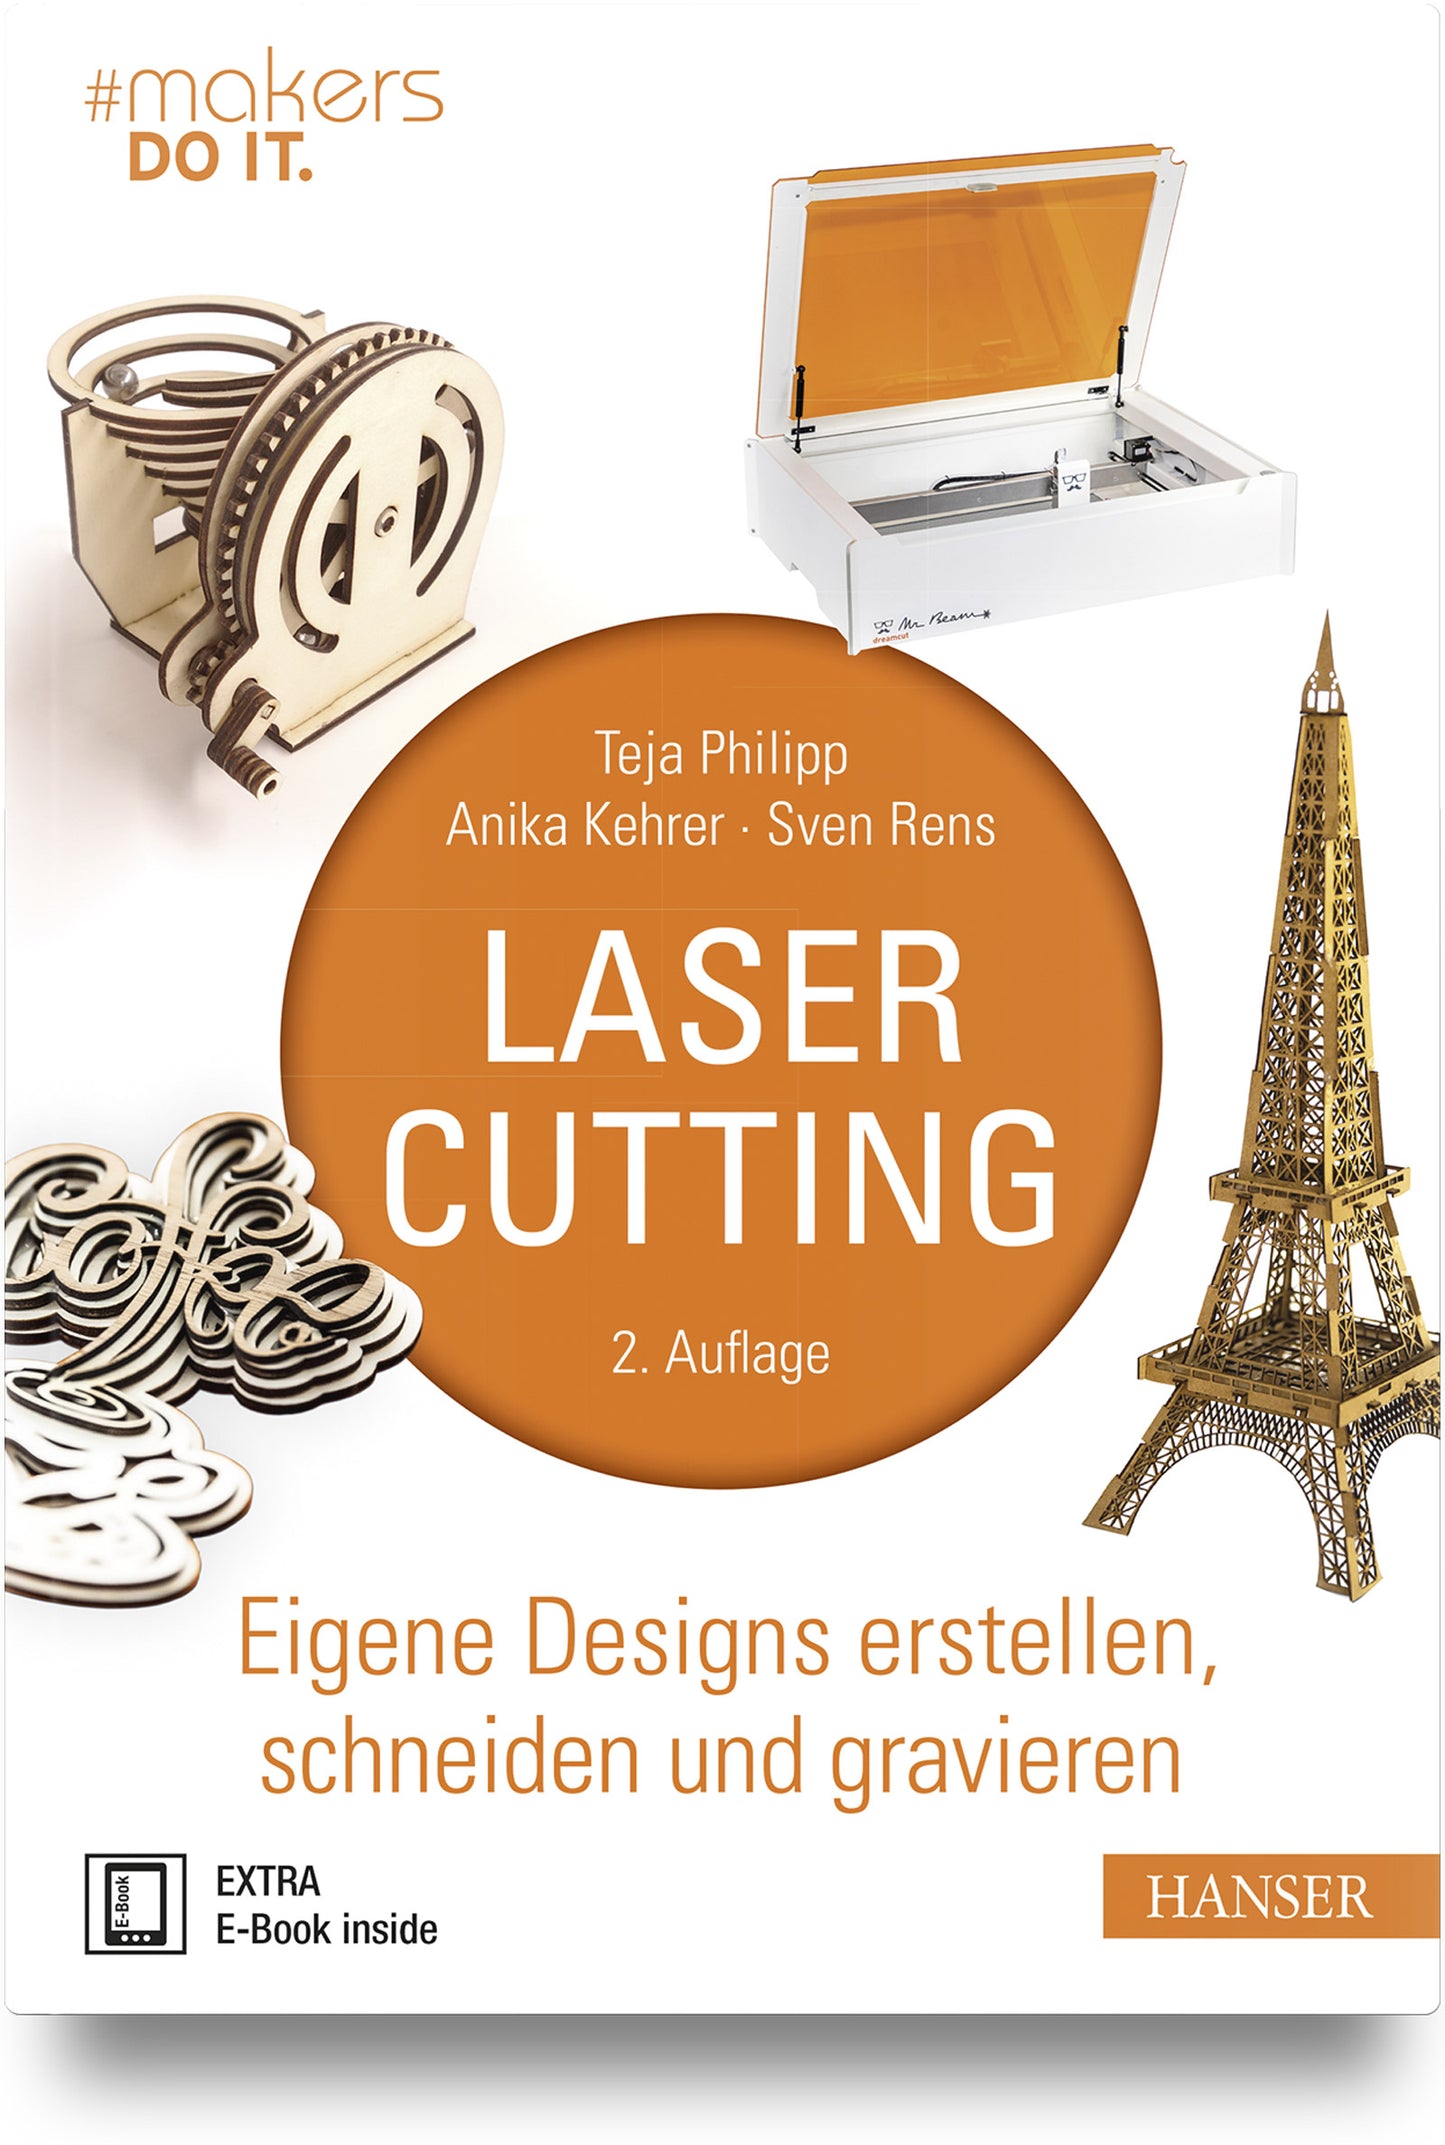 Book: Laser cutting - create, cut and engrave your own designs